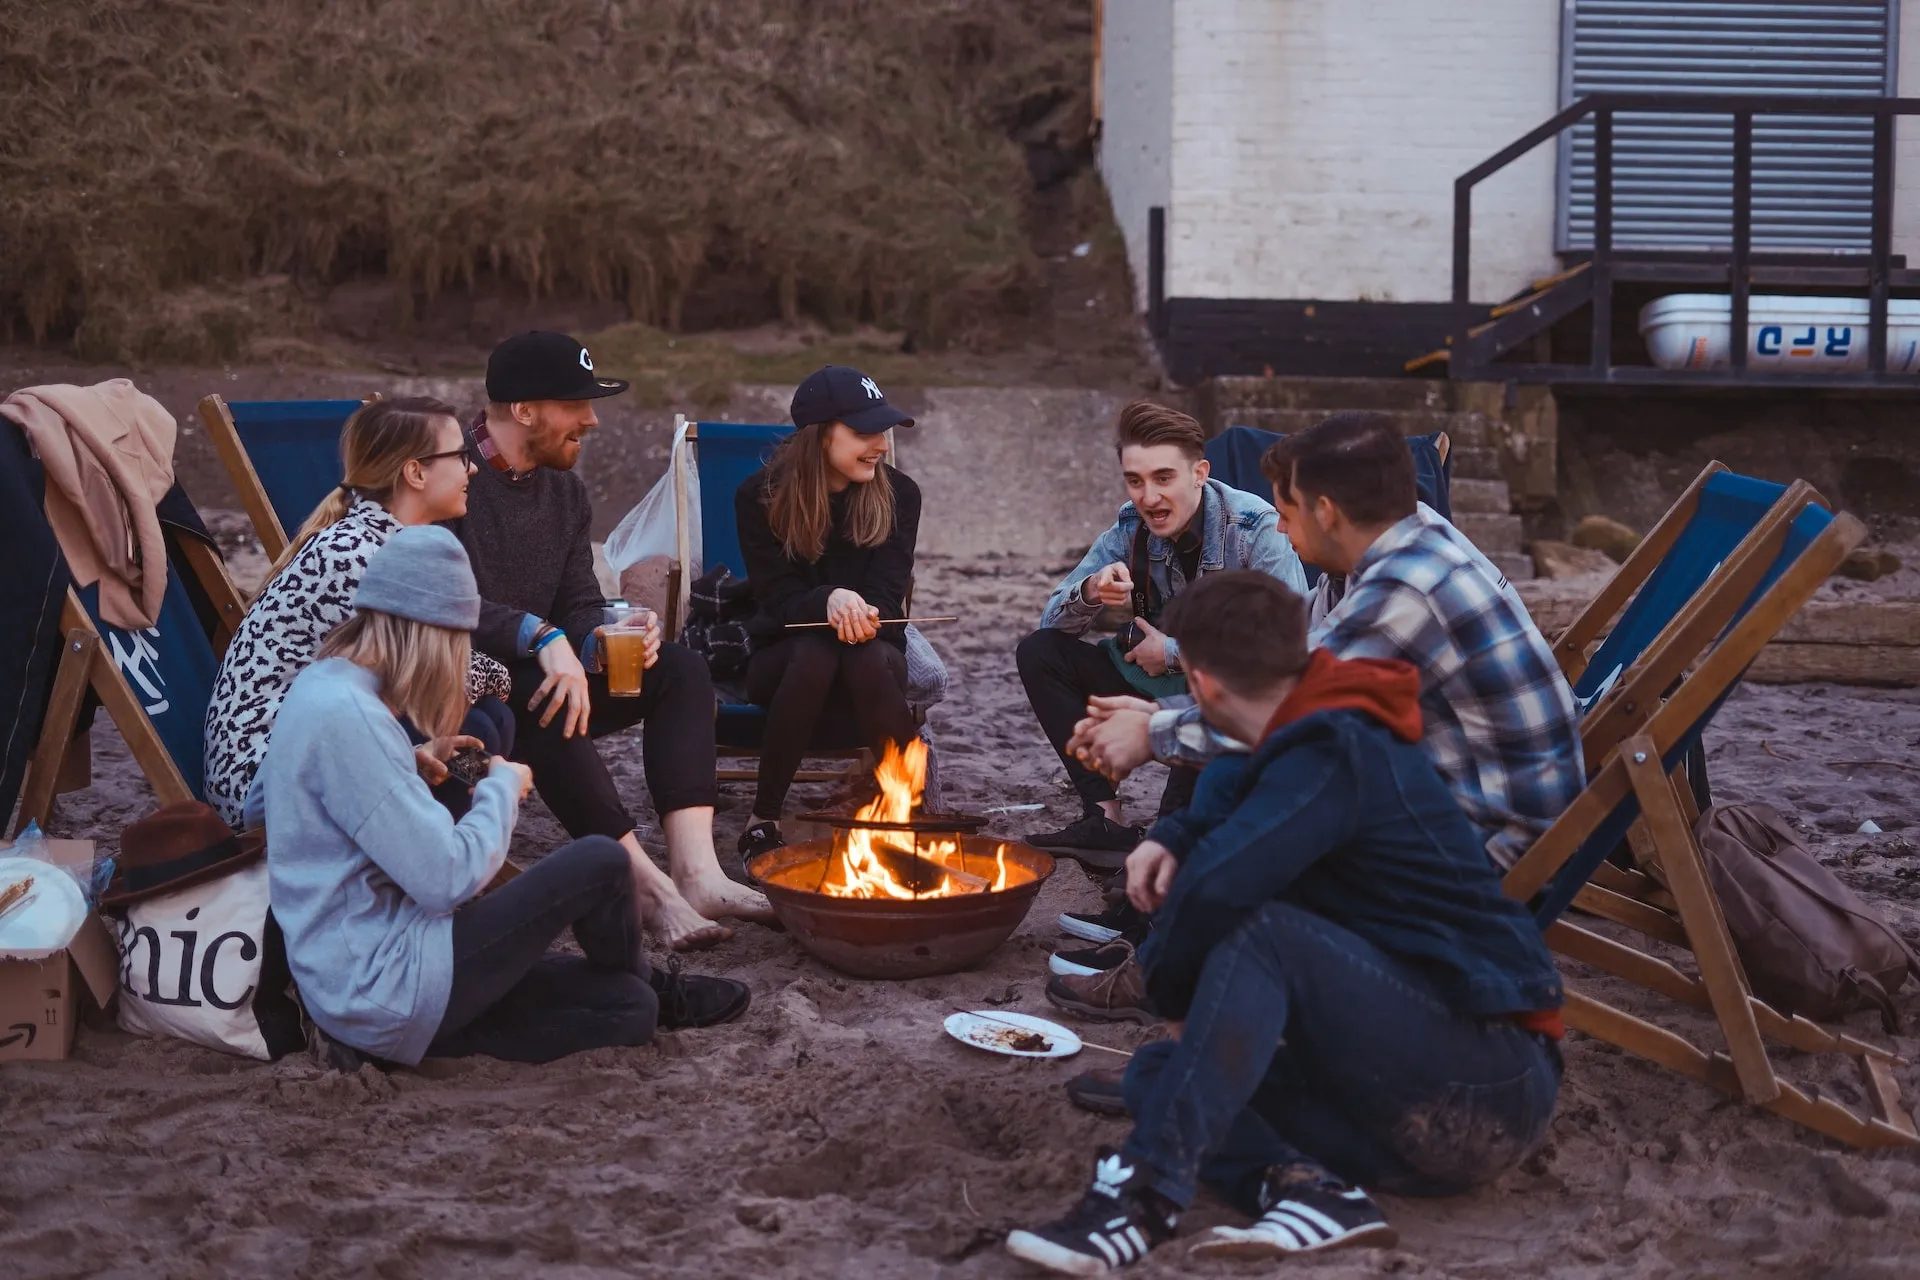 A group of friends huddled around a fire on the beach having fun.